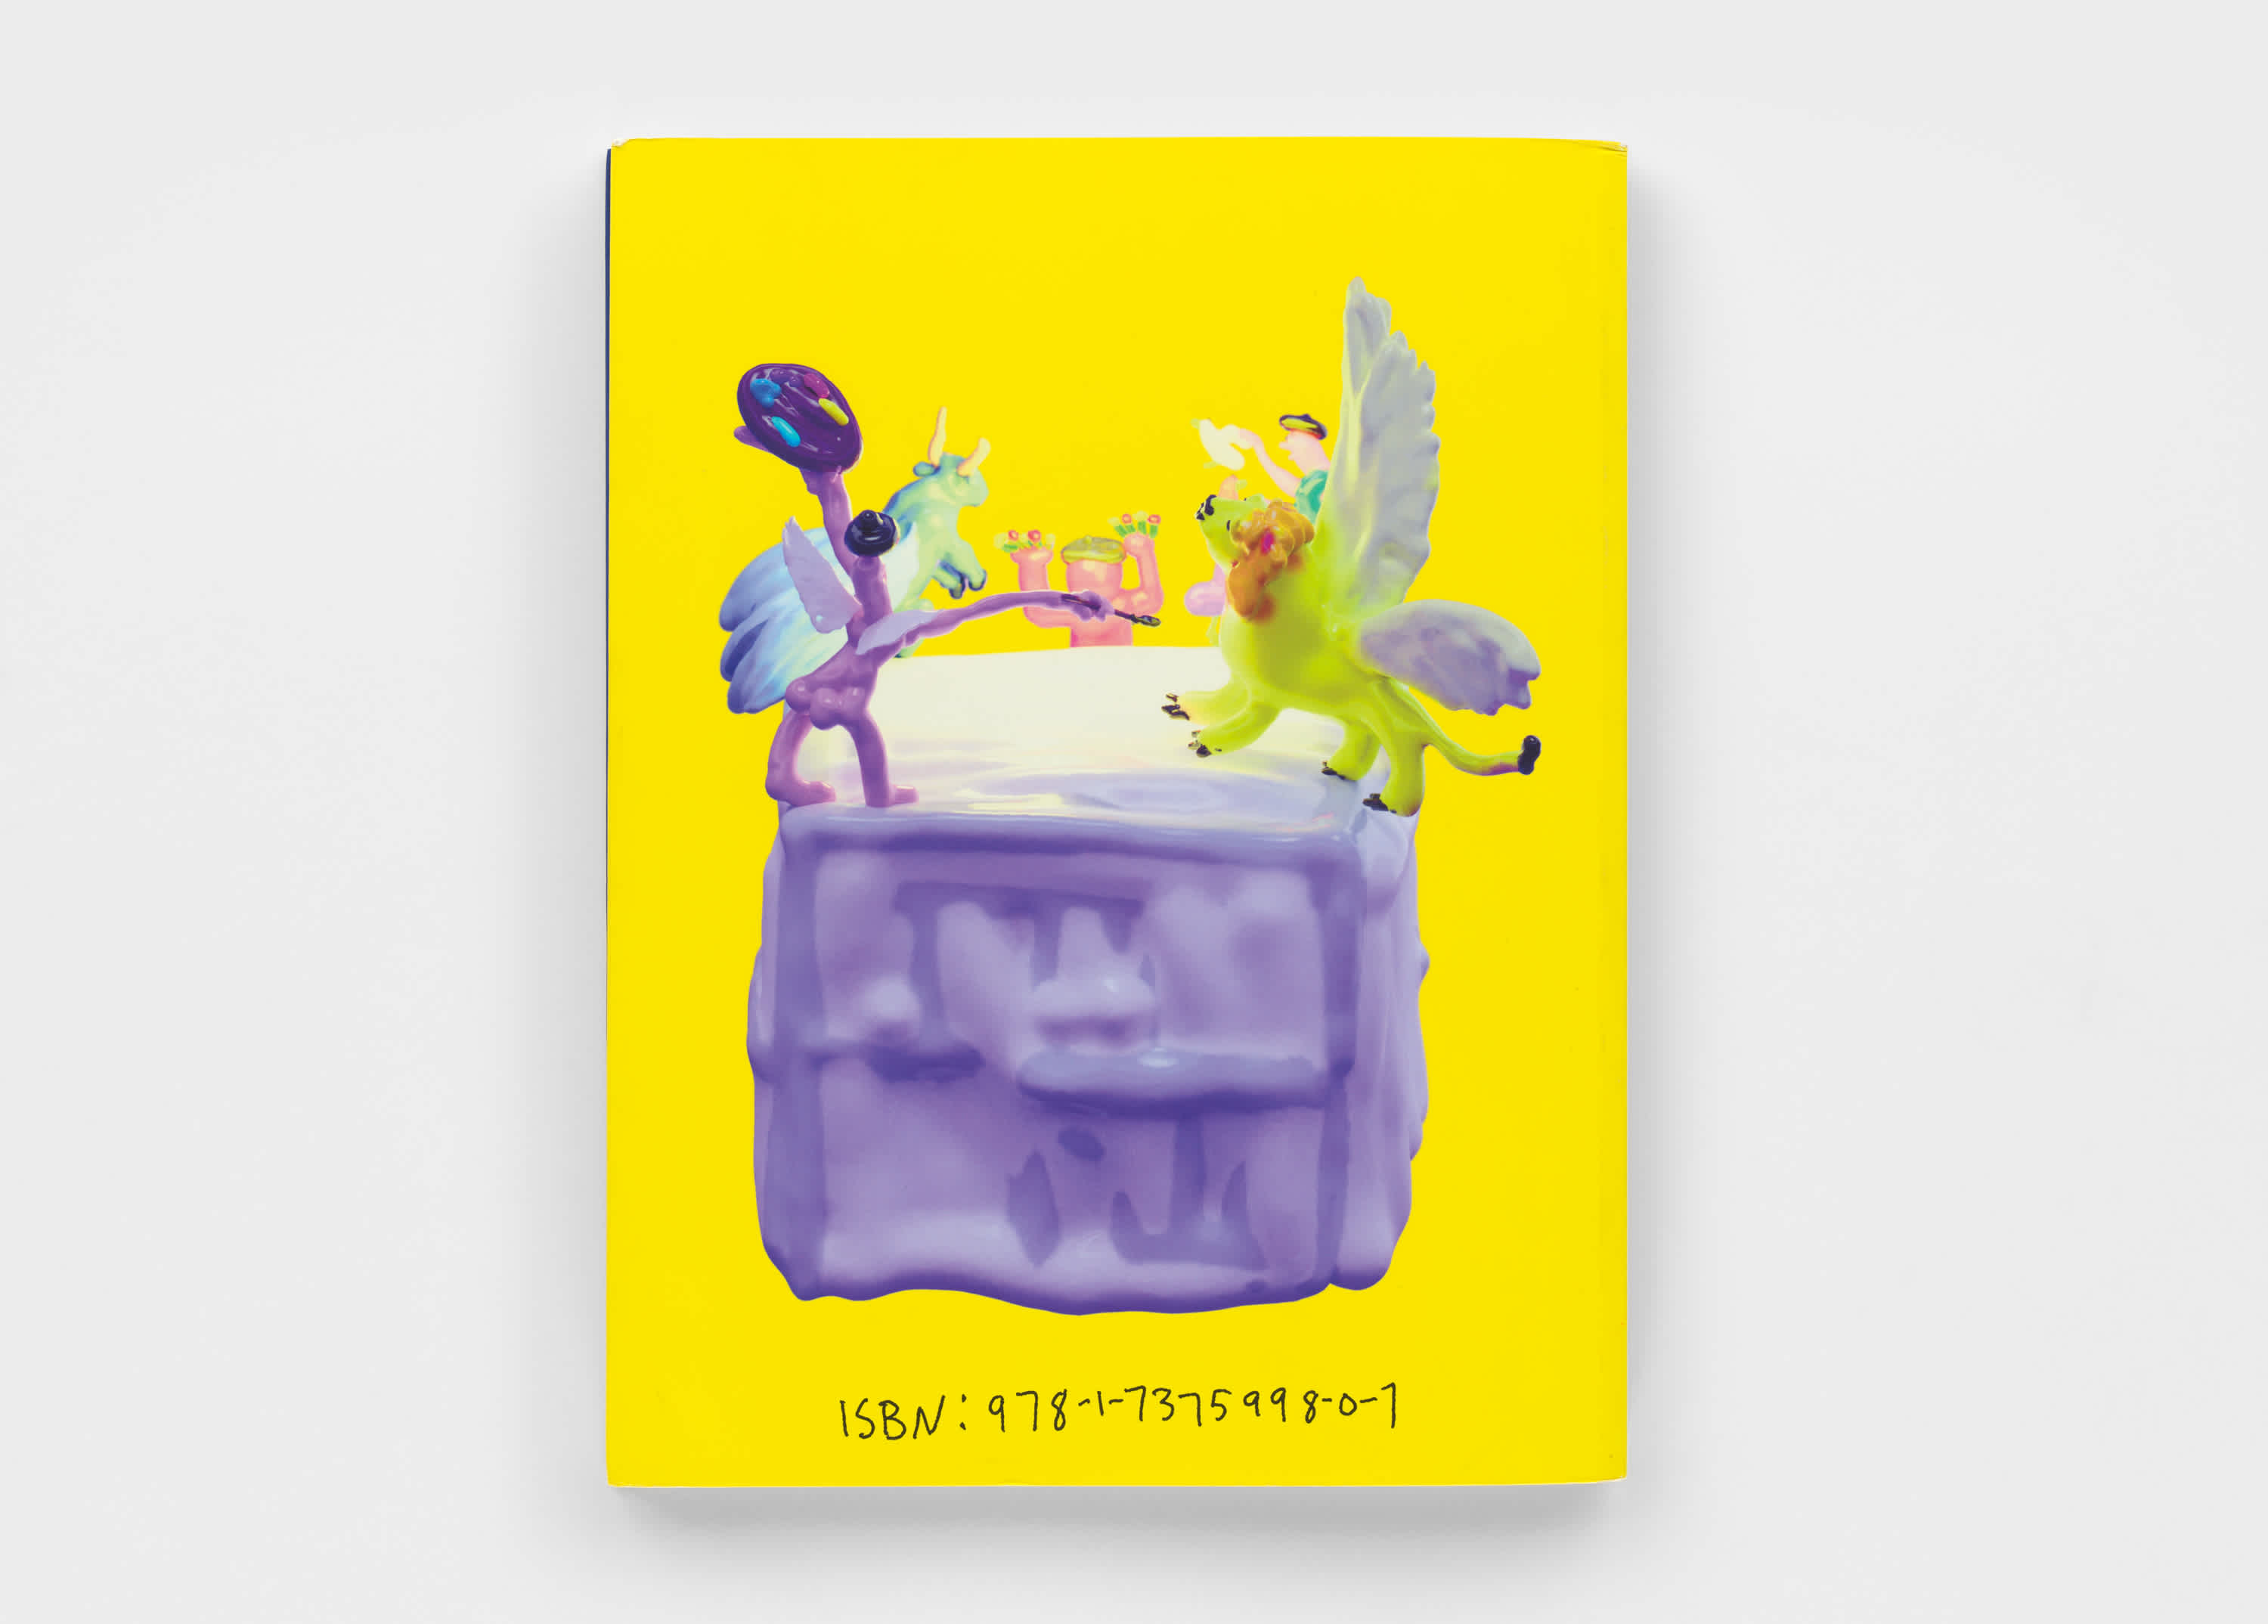 Back cover of a yellow book. A purple, green and pink sculpture is above handwritten text.